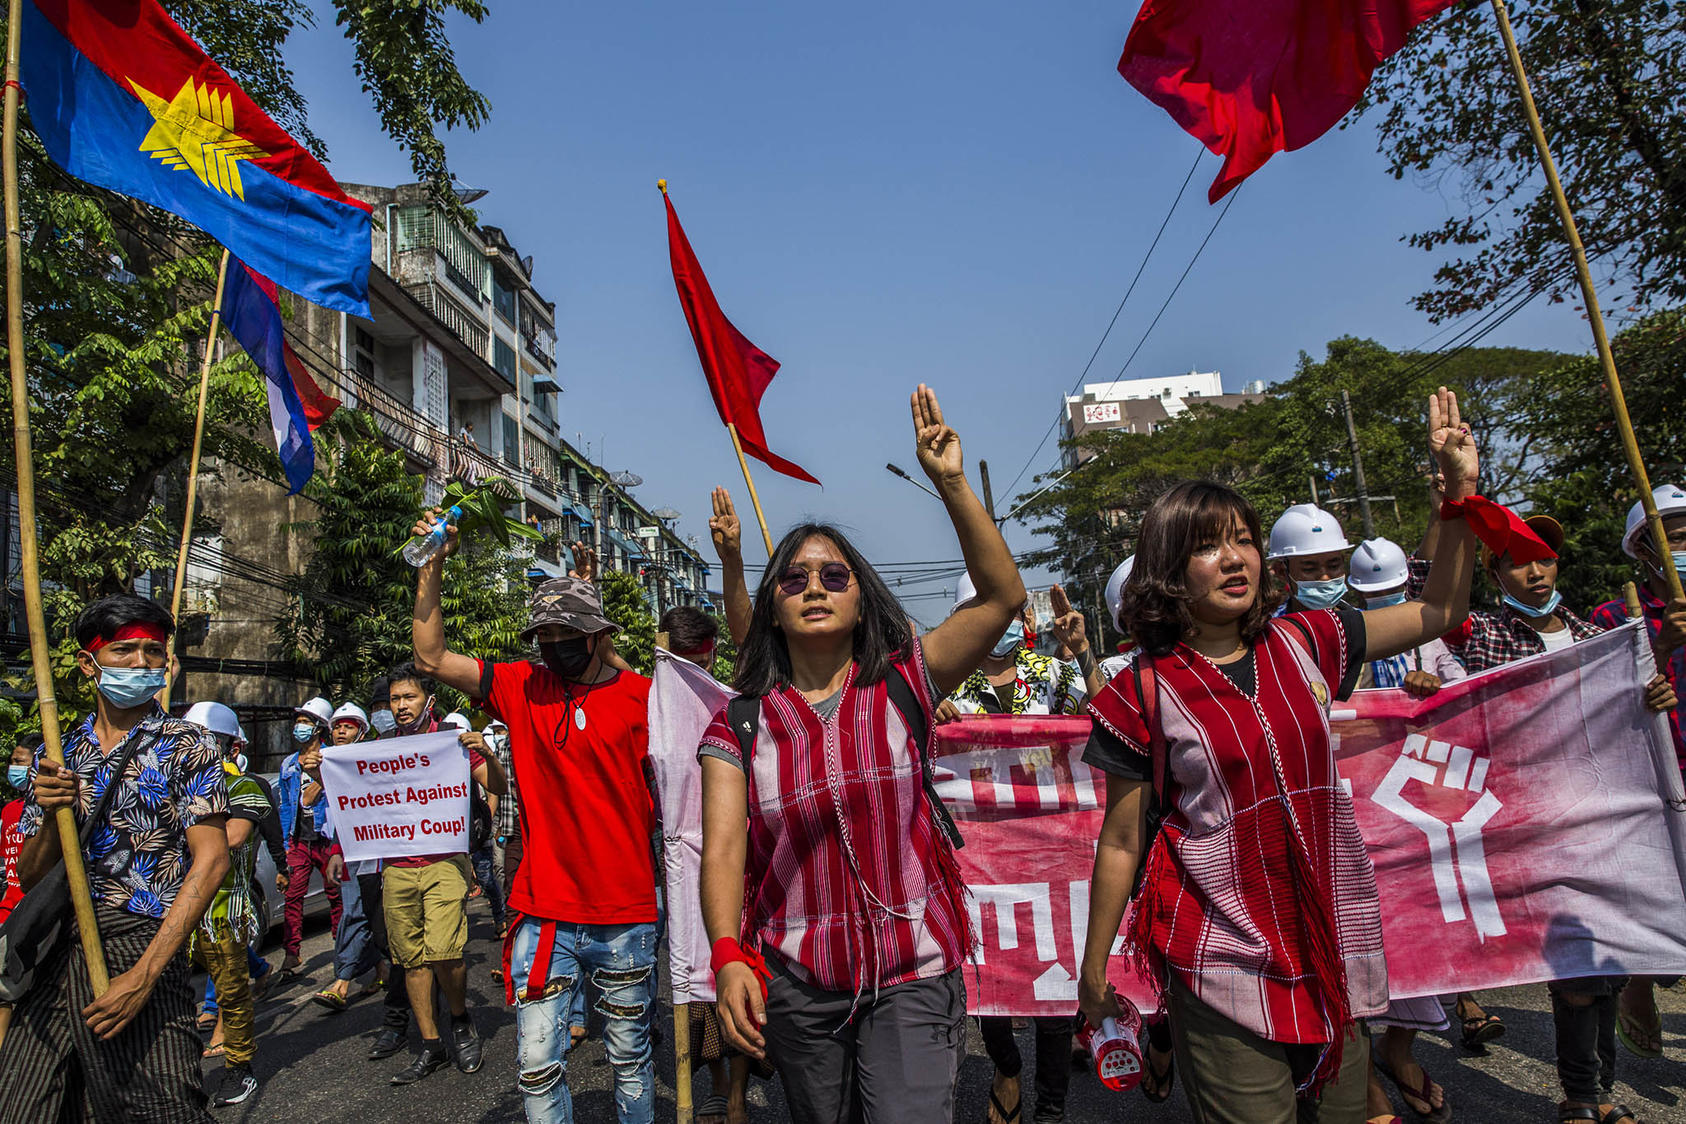 Esther Ze Naw and Ma Ei Thinzar Maung lead a rally to protest the recent military coup, in Yangon, Myanmar, Feb. 6, 2021. (The New York Times)